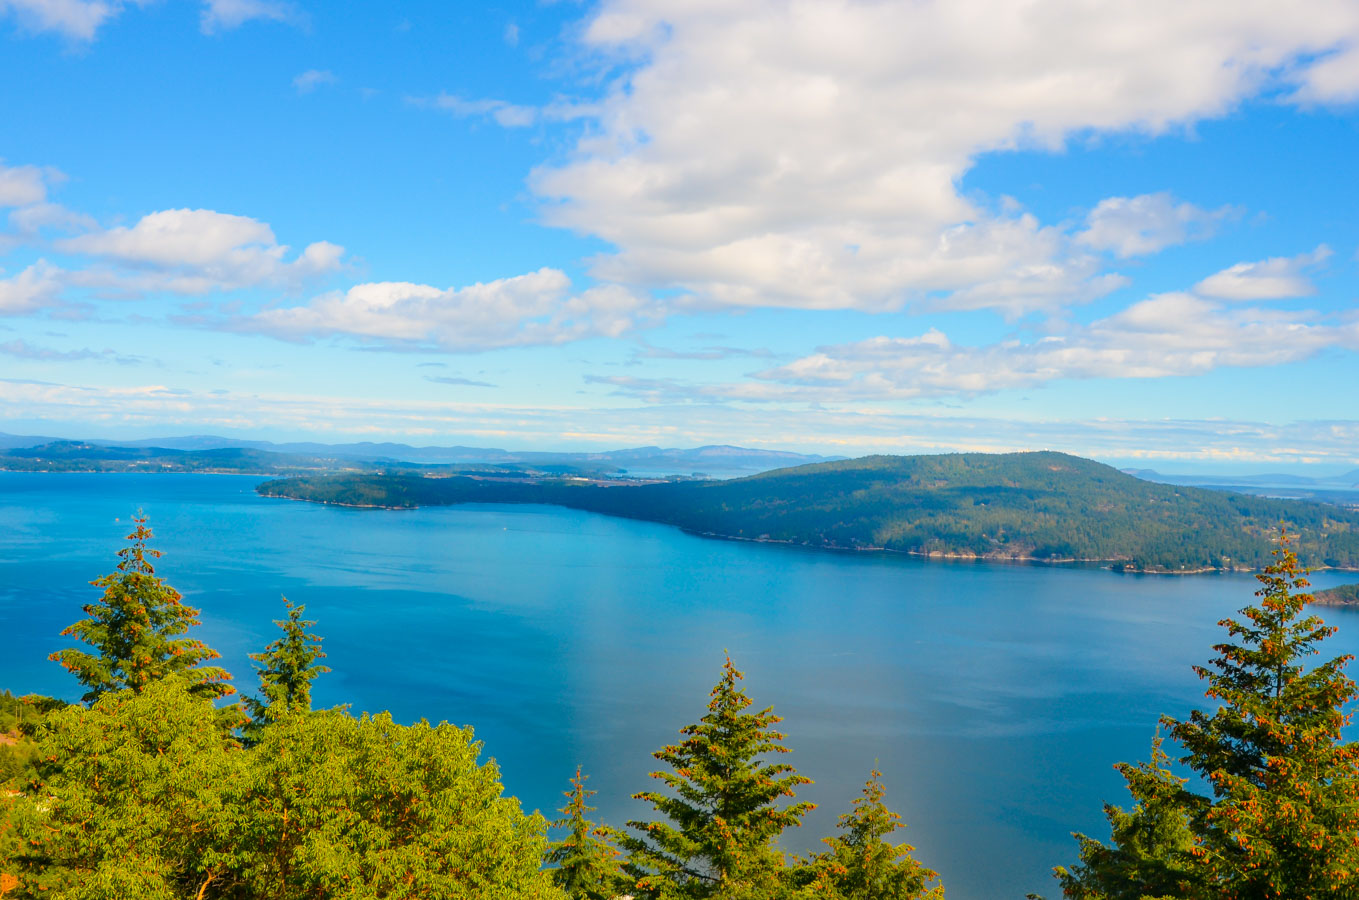 What to Do in Victoria, B.C. Travel Guide | The Malahat Vancouver Island